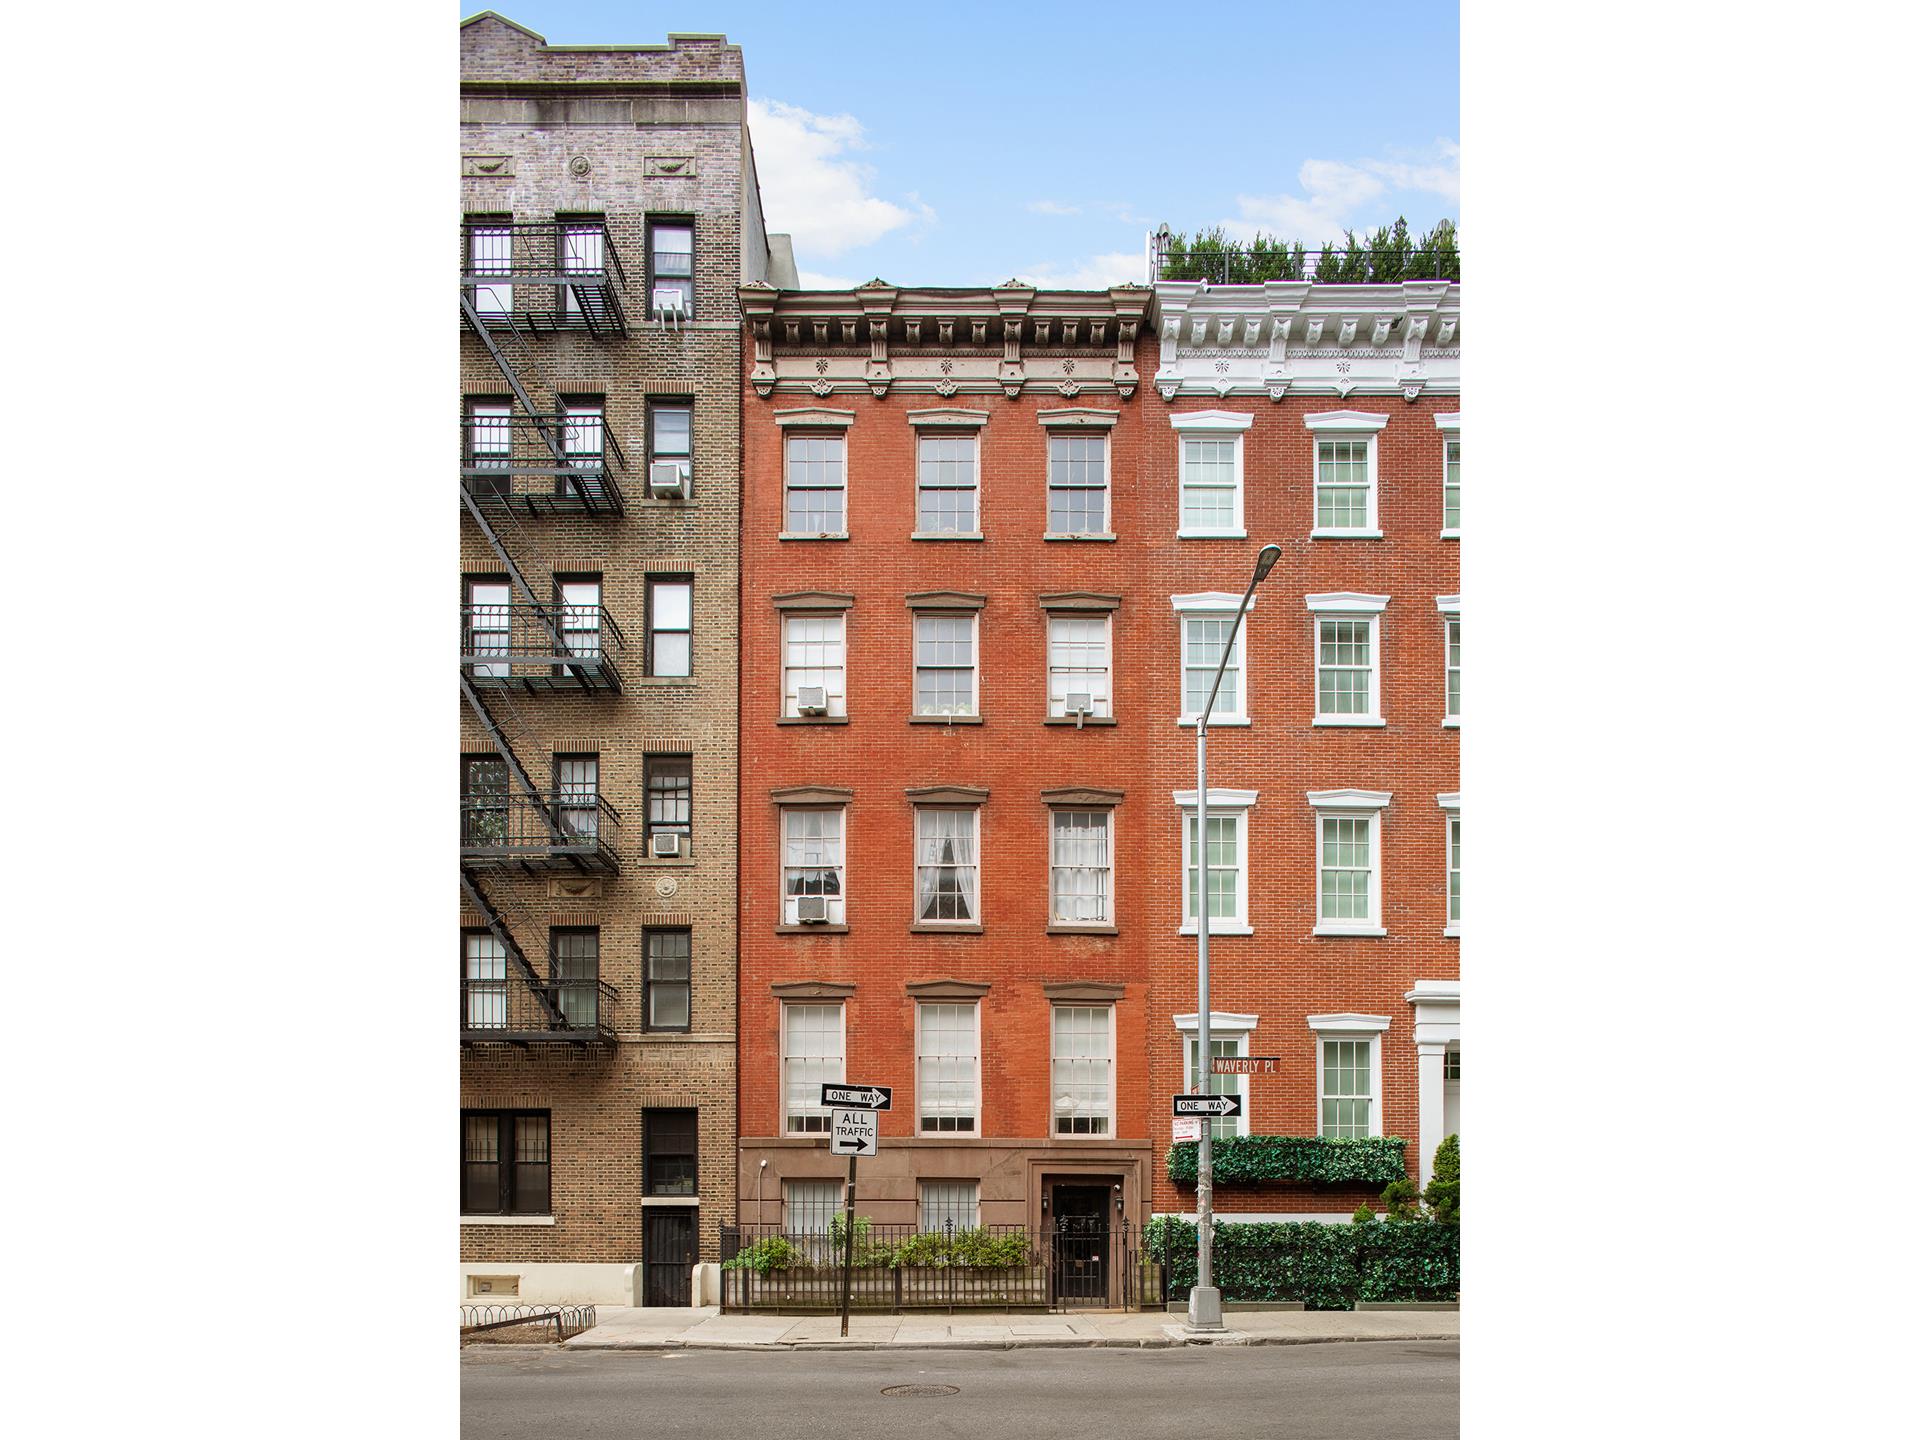 144 Waverly Place, West Village, Downtown, NYC - 5 Bedrooms  
5 Bathrooms  
22 Rooms - 